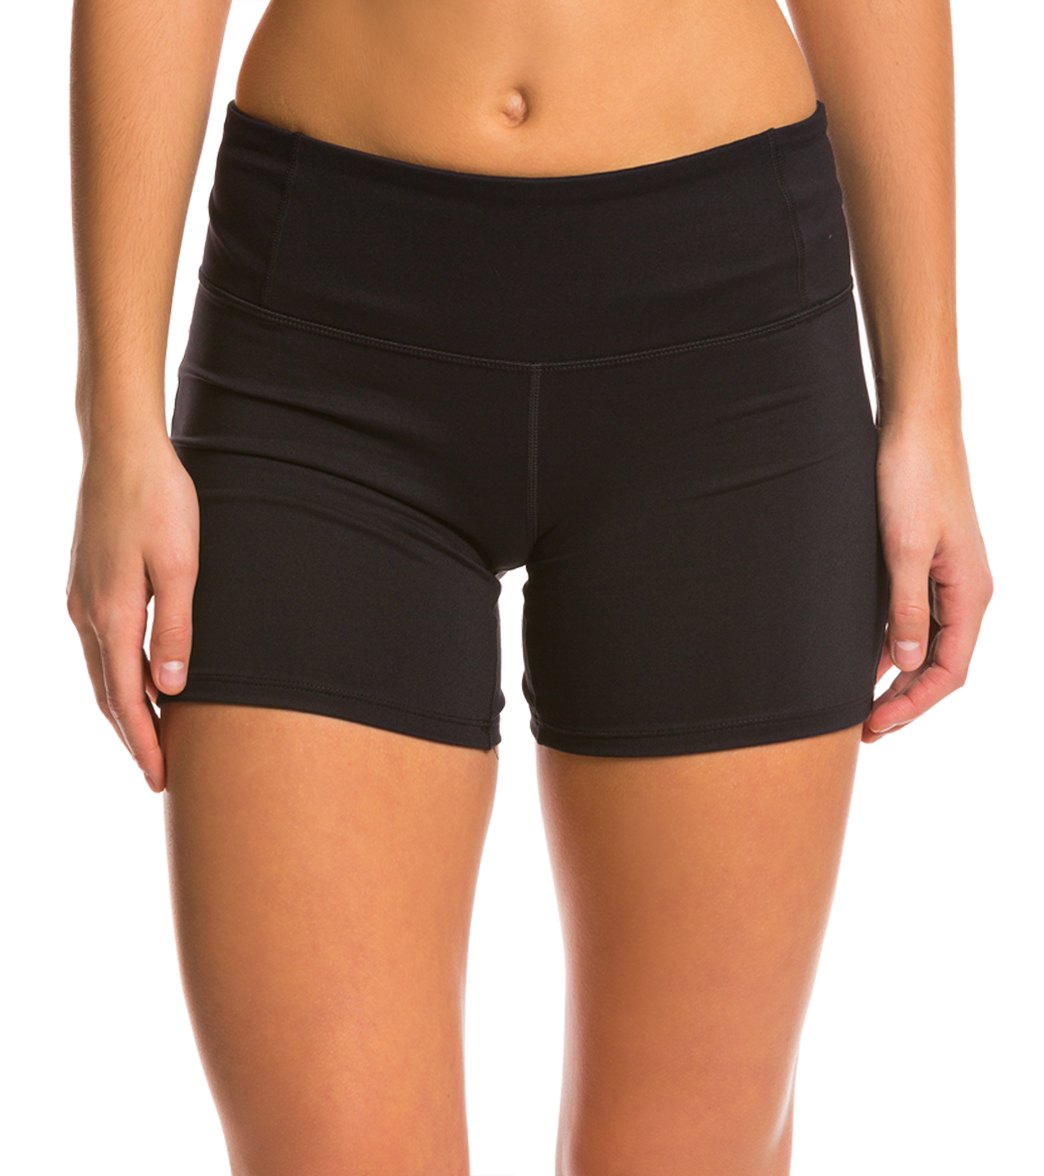 Body Glove Active Women's Get Shorty Shorts at SwimOutlet.com